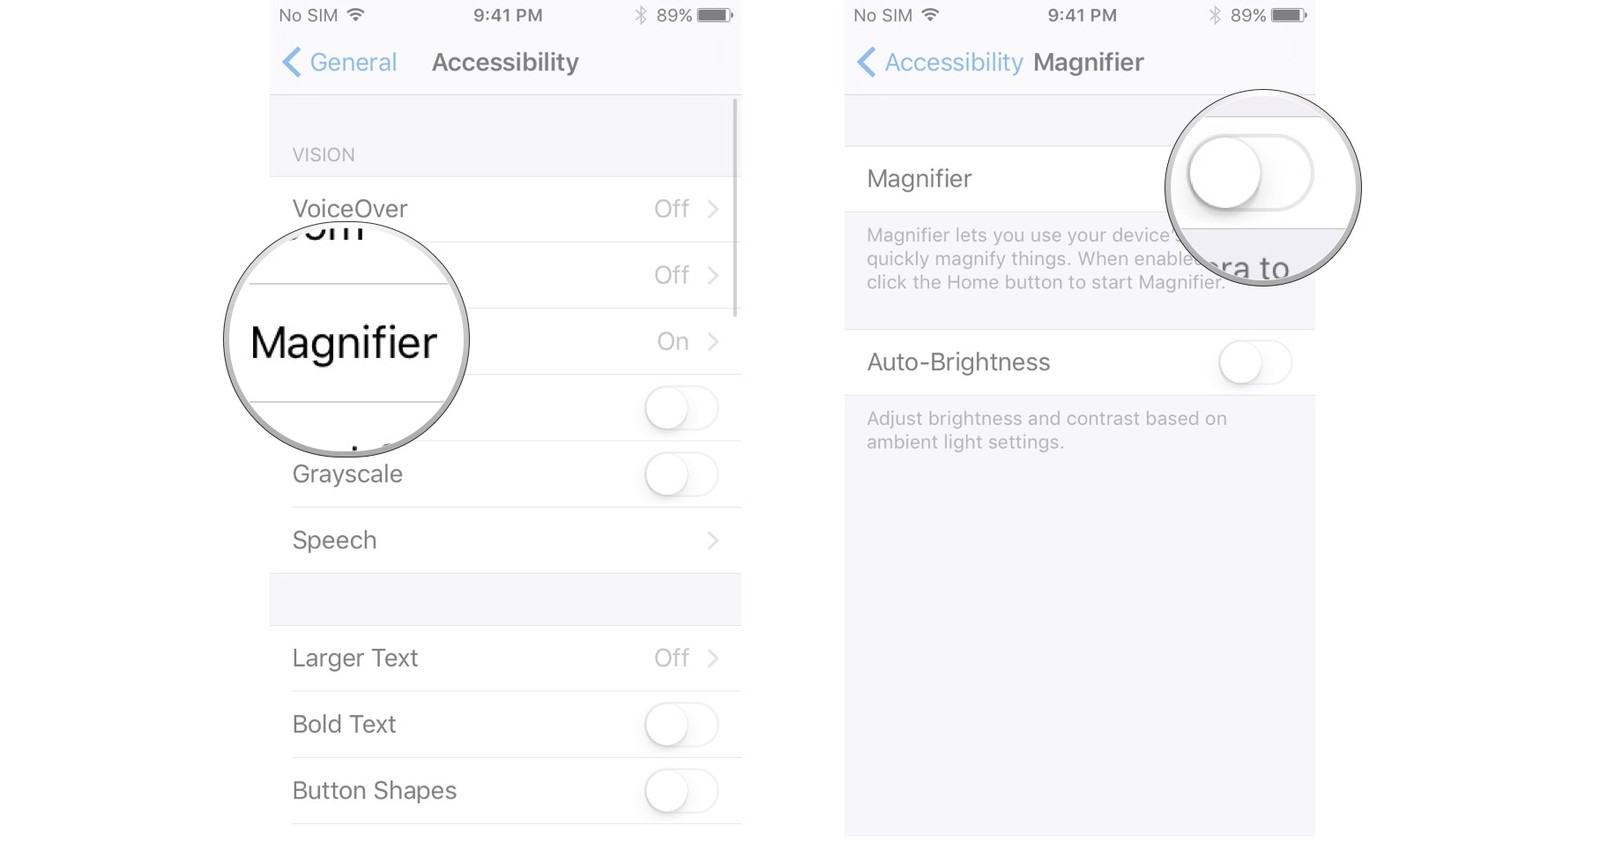 accessibility-ios10-magnifier-enable-magnifier-screens-02